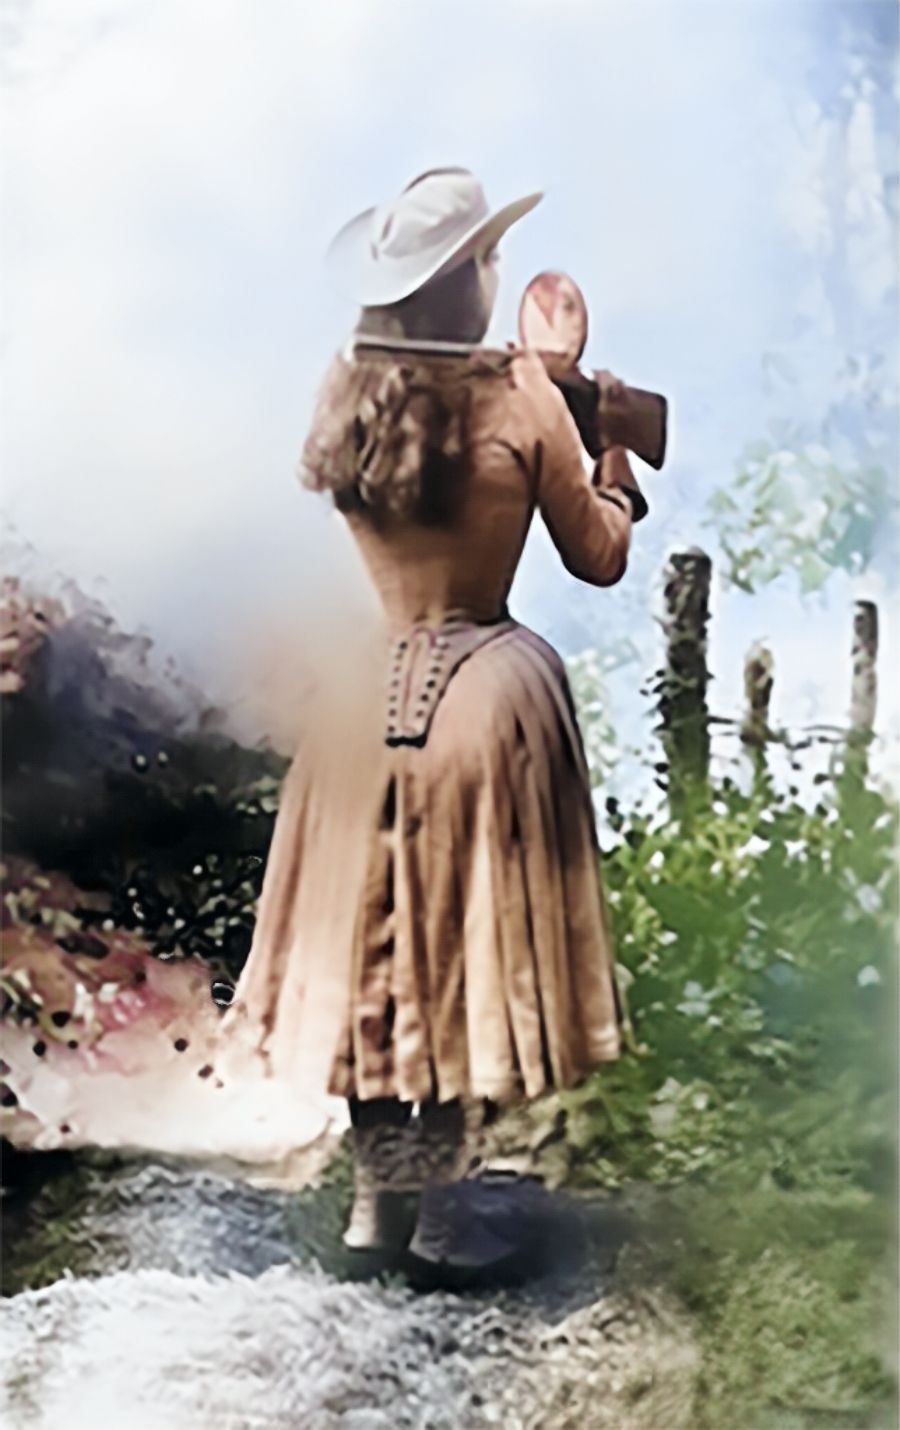 Annie Oakley Shooting Over the Shoulder (1899)